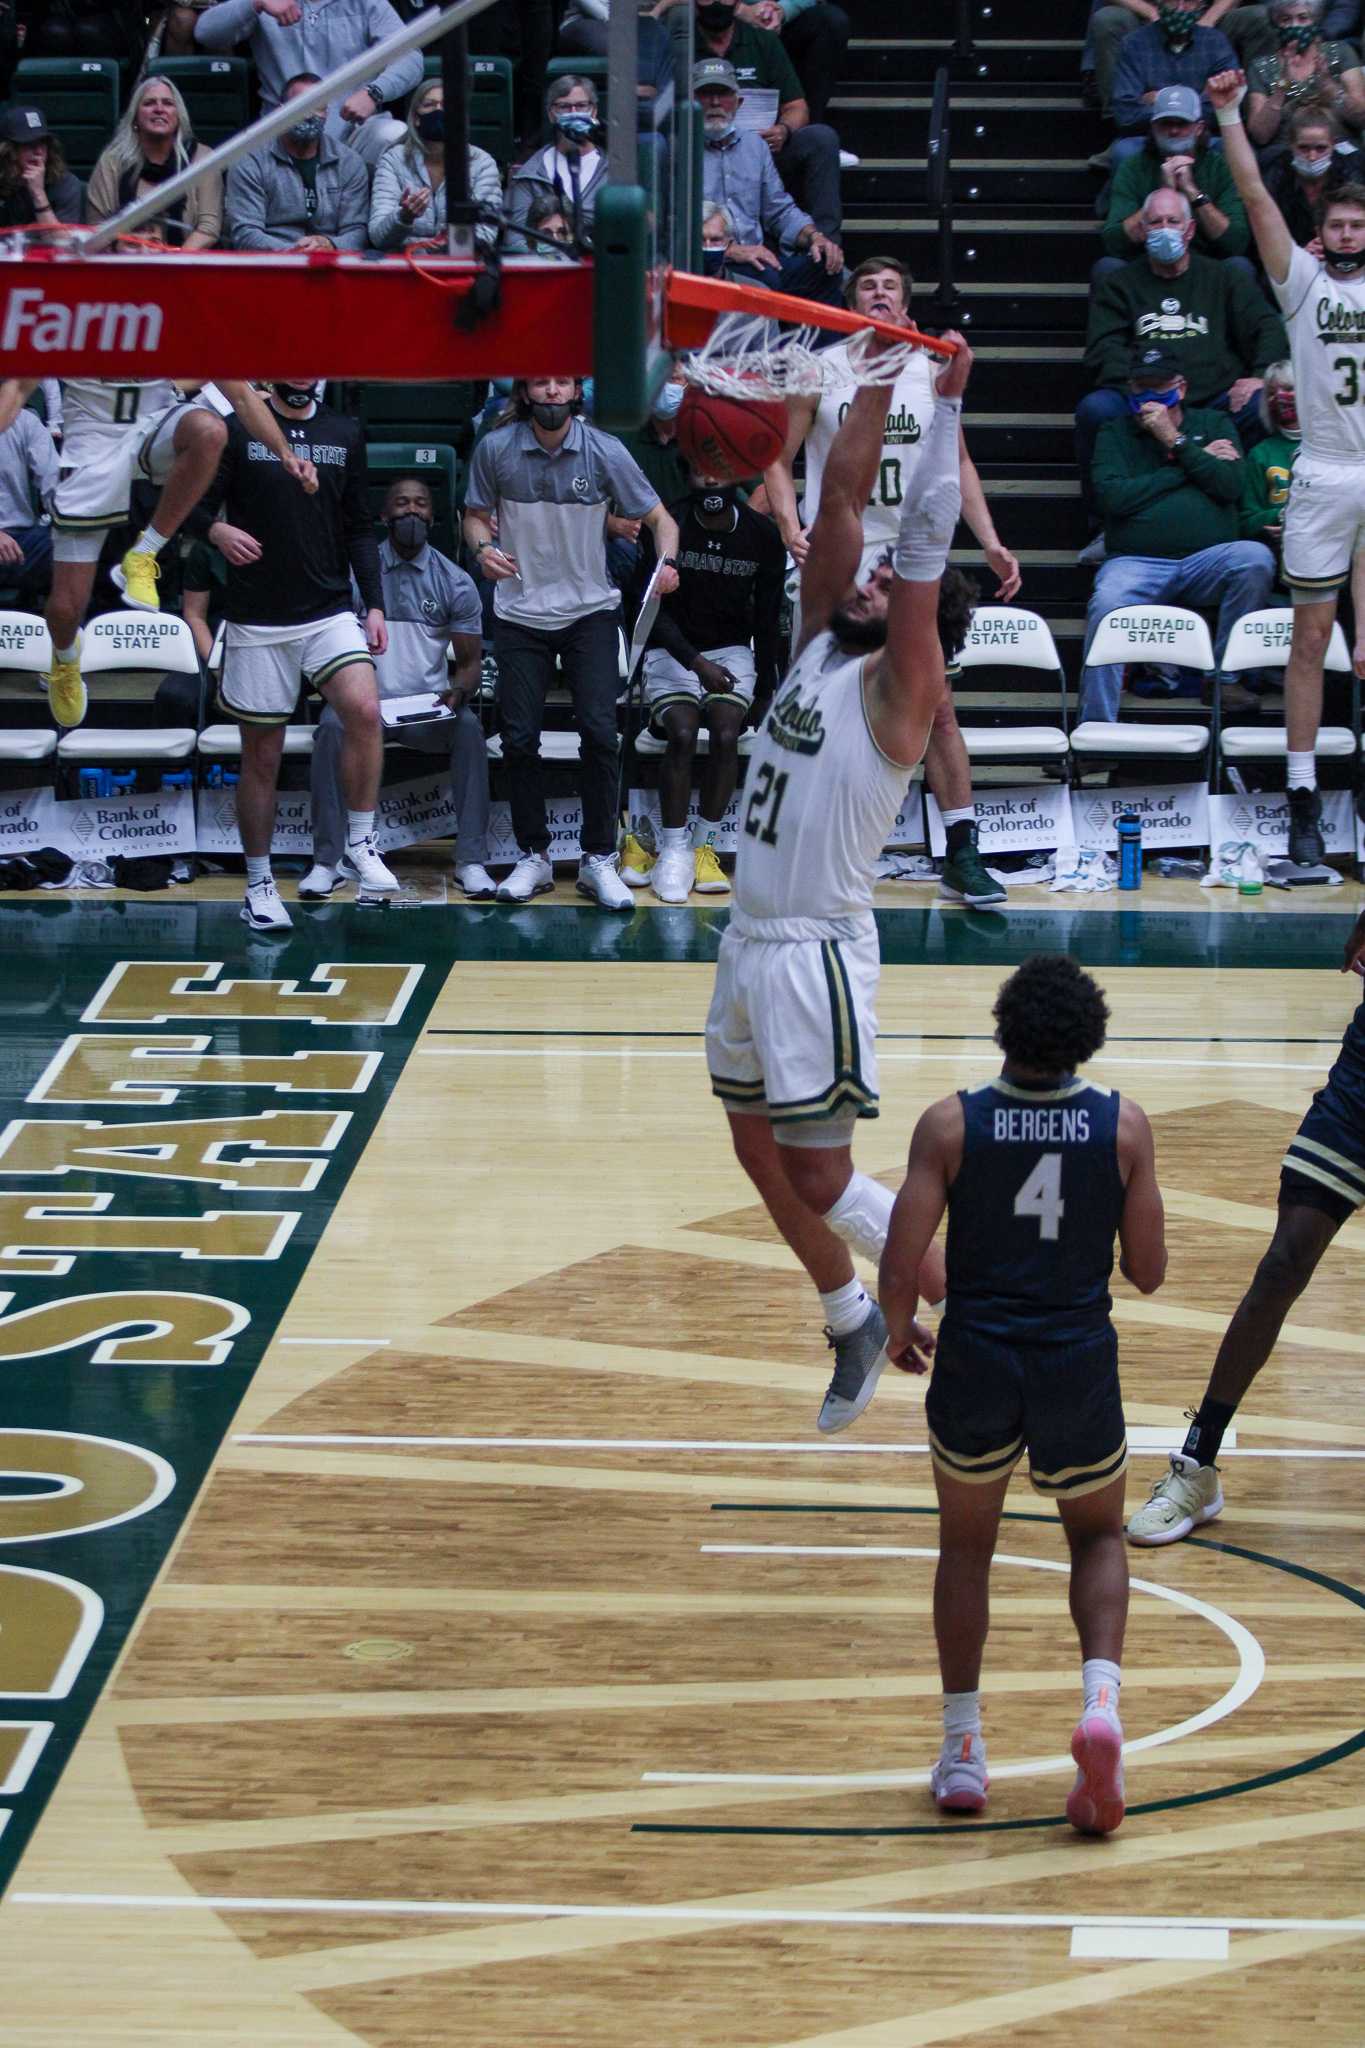 Colorado State Forward David Roddy dunks the ball while a defender watches